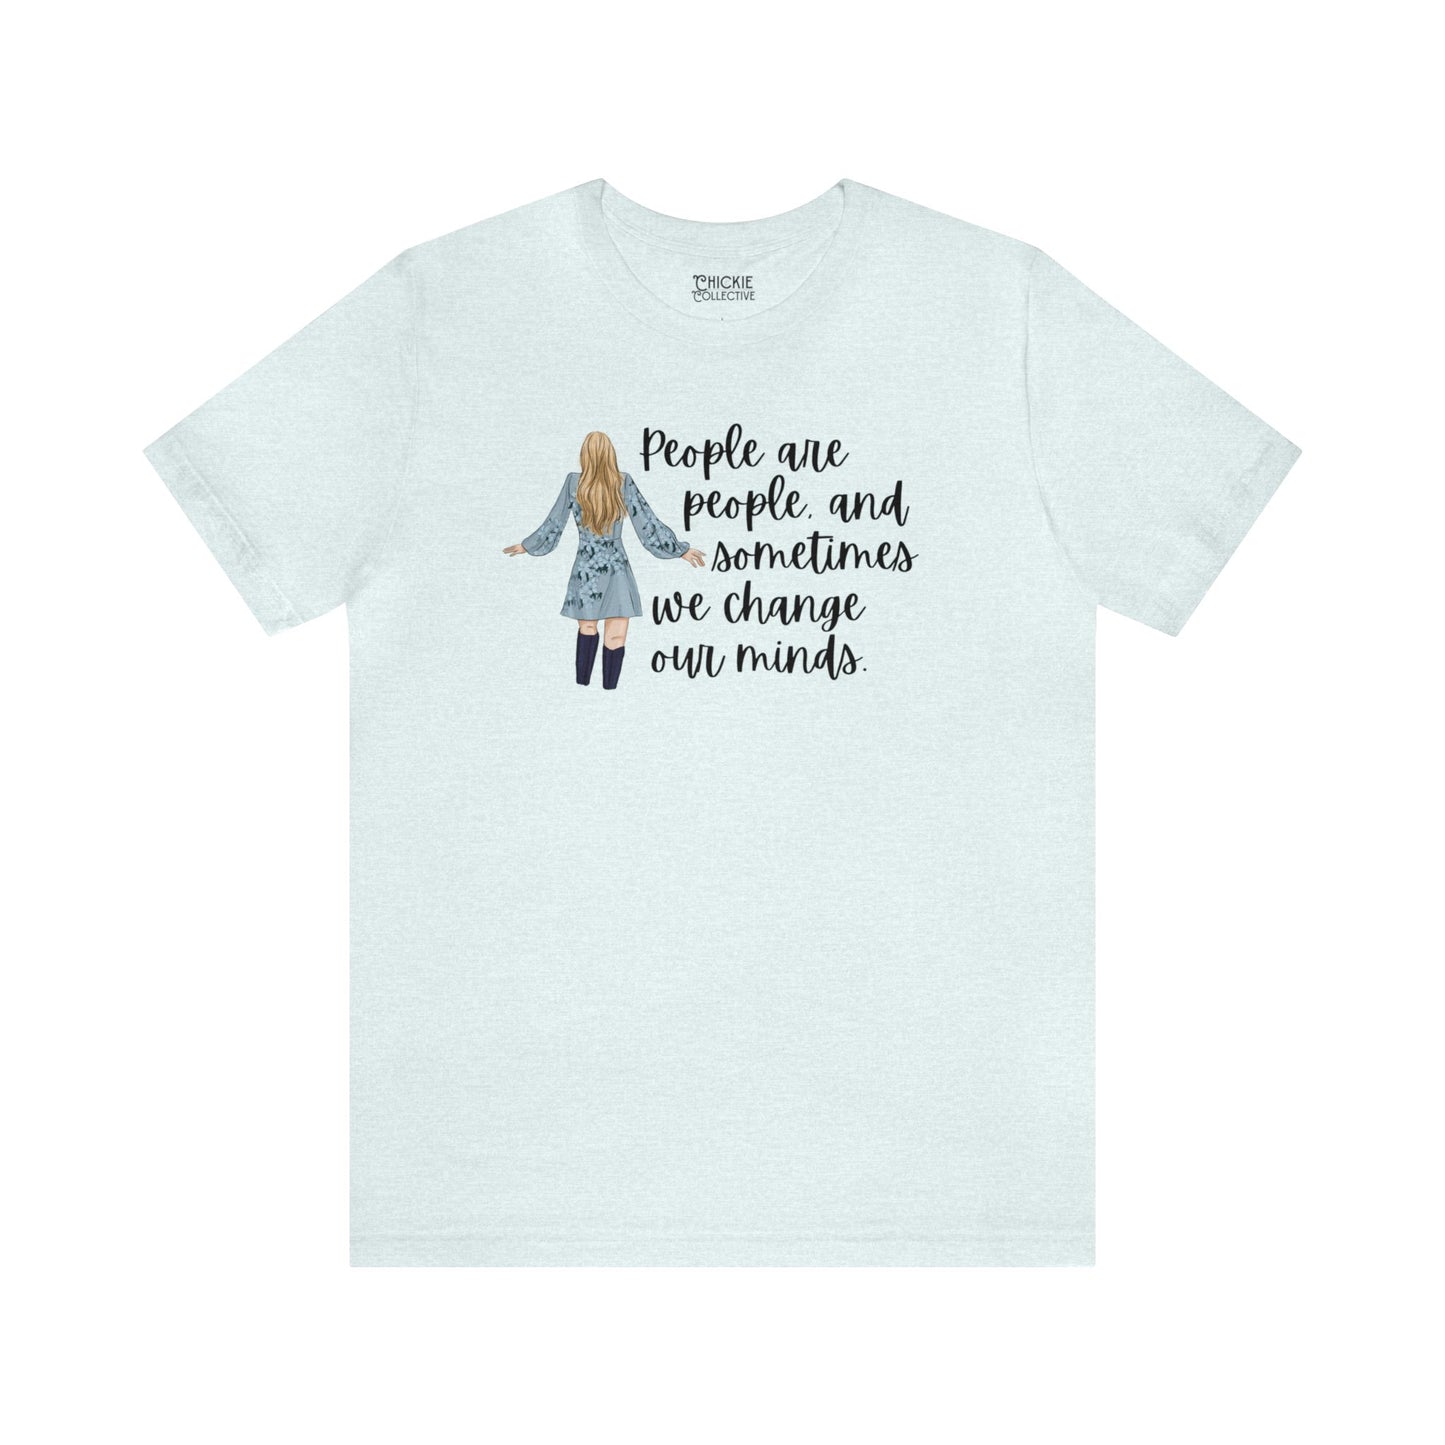 Taylor Swift Preppy Picture T-Shirt - People Are People And Sometimes We Change Our Minds